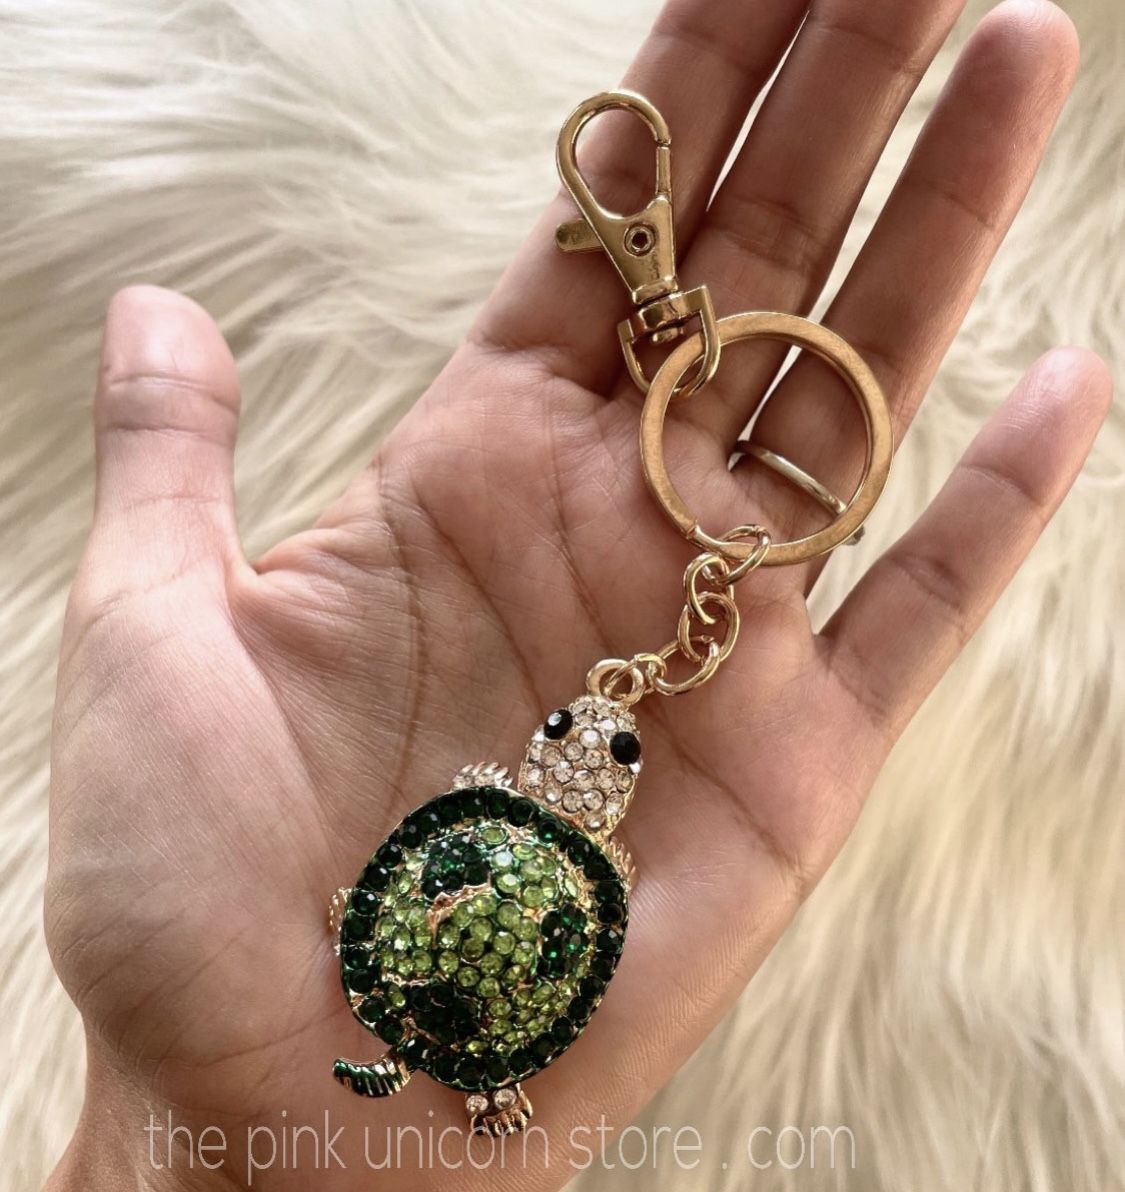 Brand New Lucky Green Sparkly Turtle Keychain 